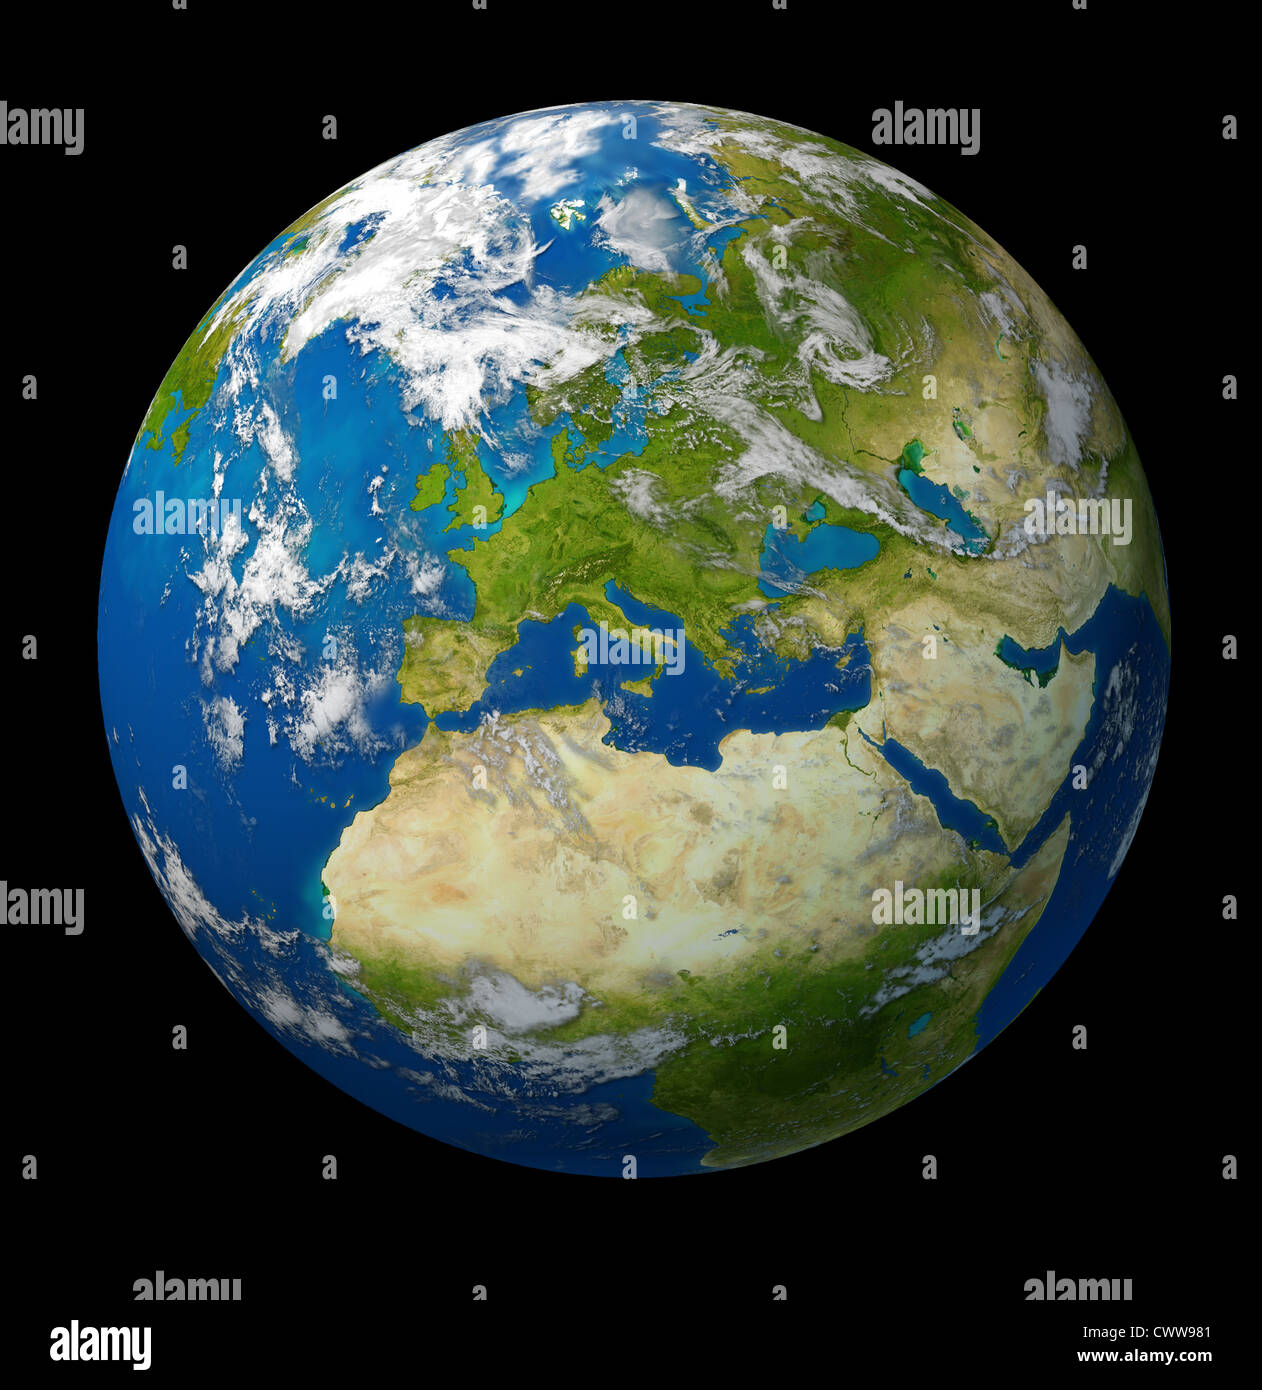 Planet Earth featuring Europe and European union countries including France Germany Italy and England surrounded by blue ocean and clouds on black background. Stock Photo